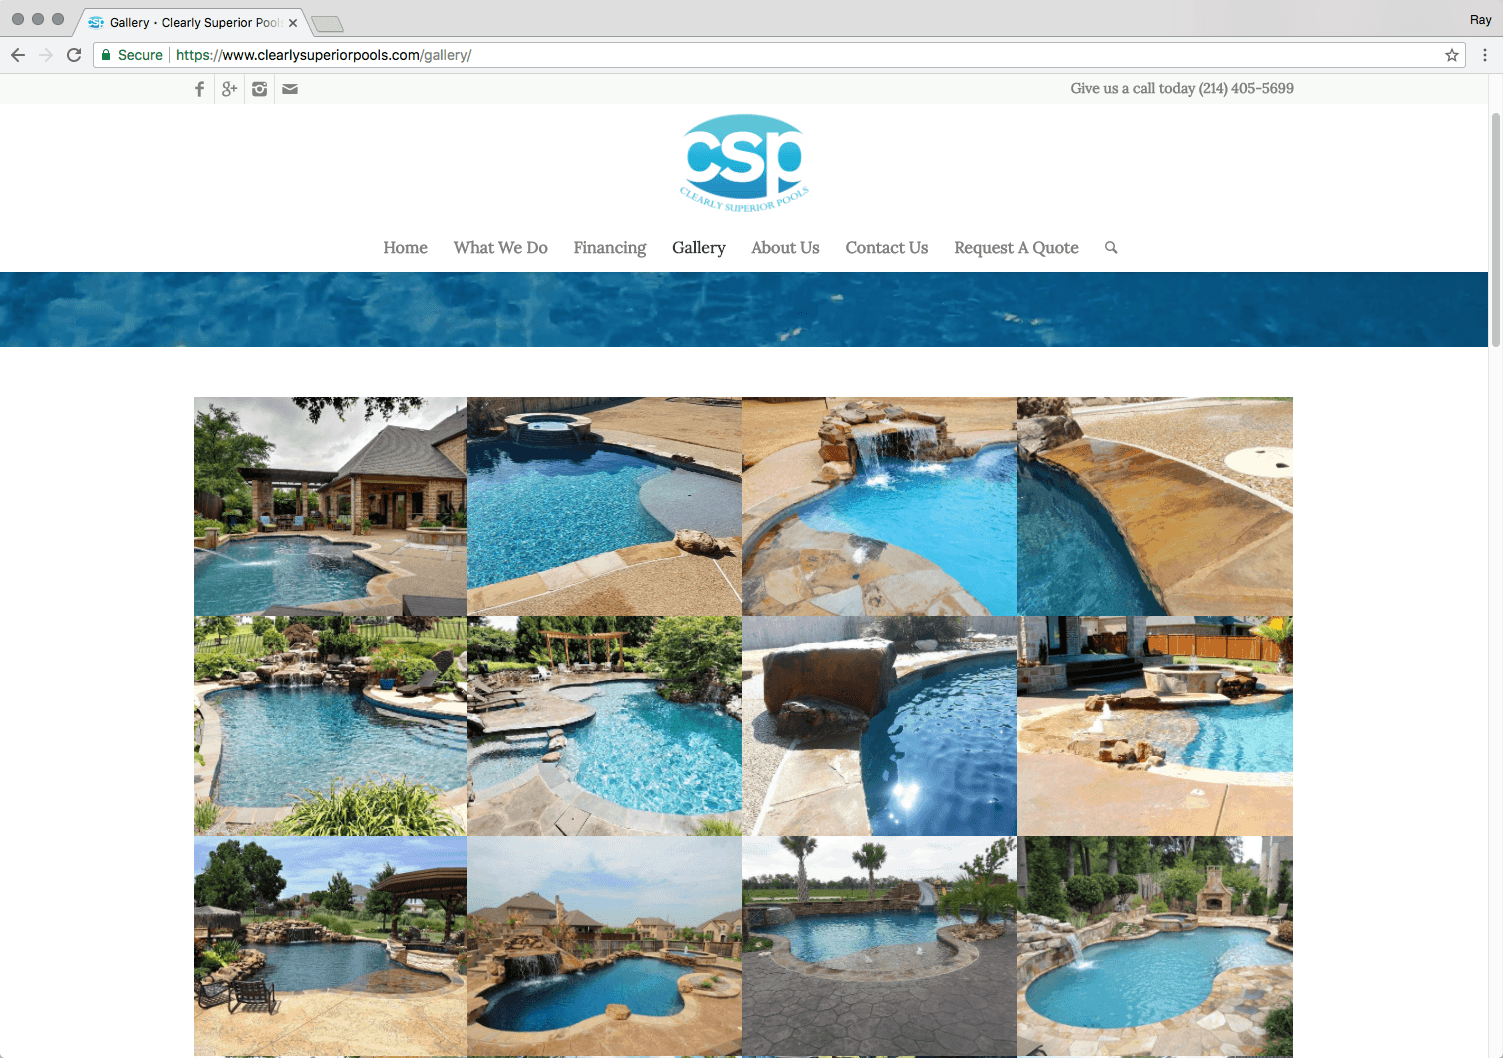 Clearly Superior Pools Website Design Gallery Page